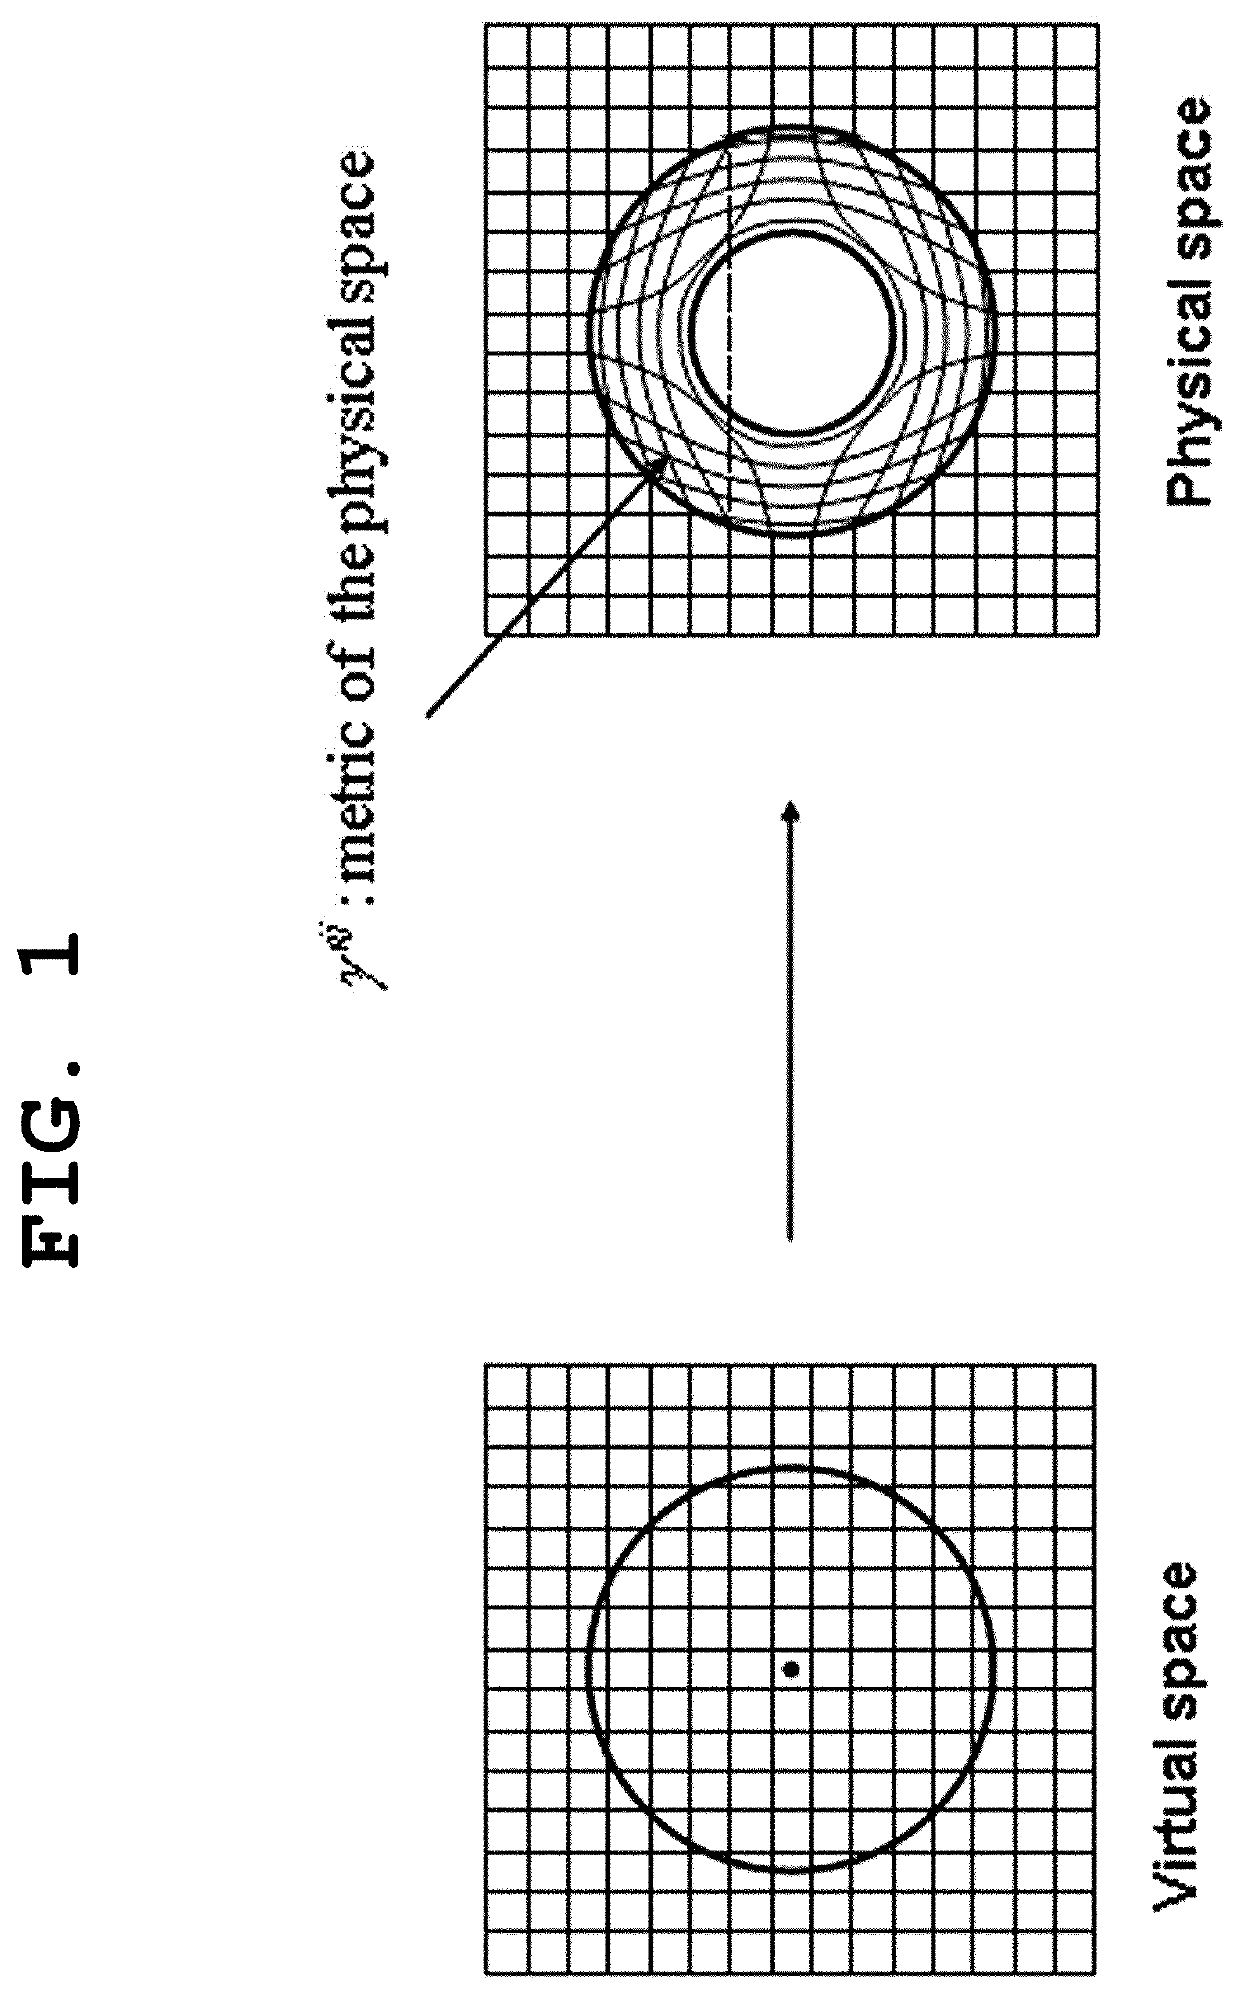 Apparatus and method for invisibility cloaking apparatus